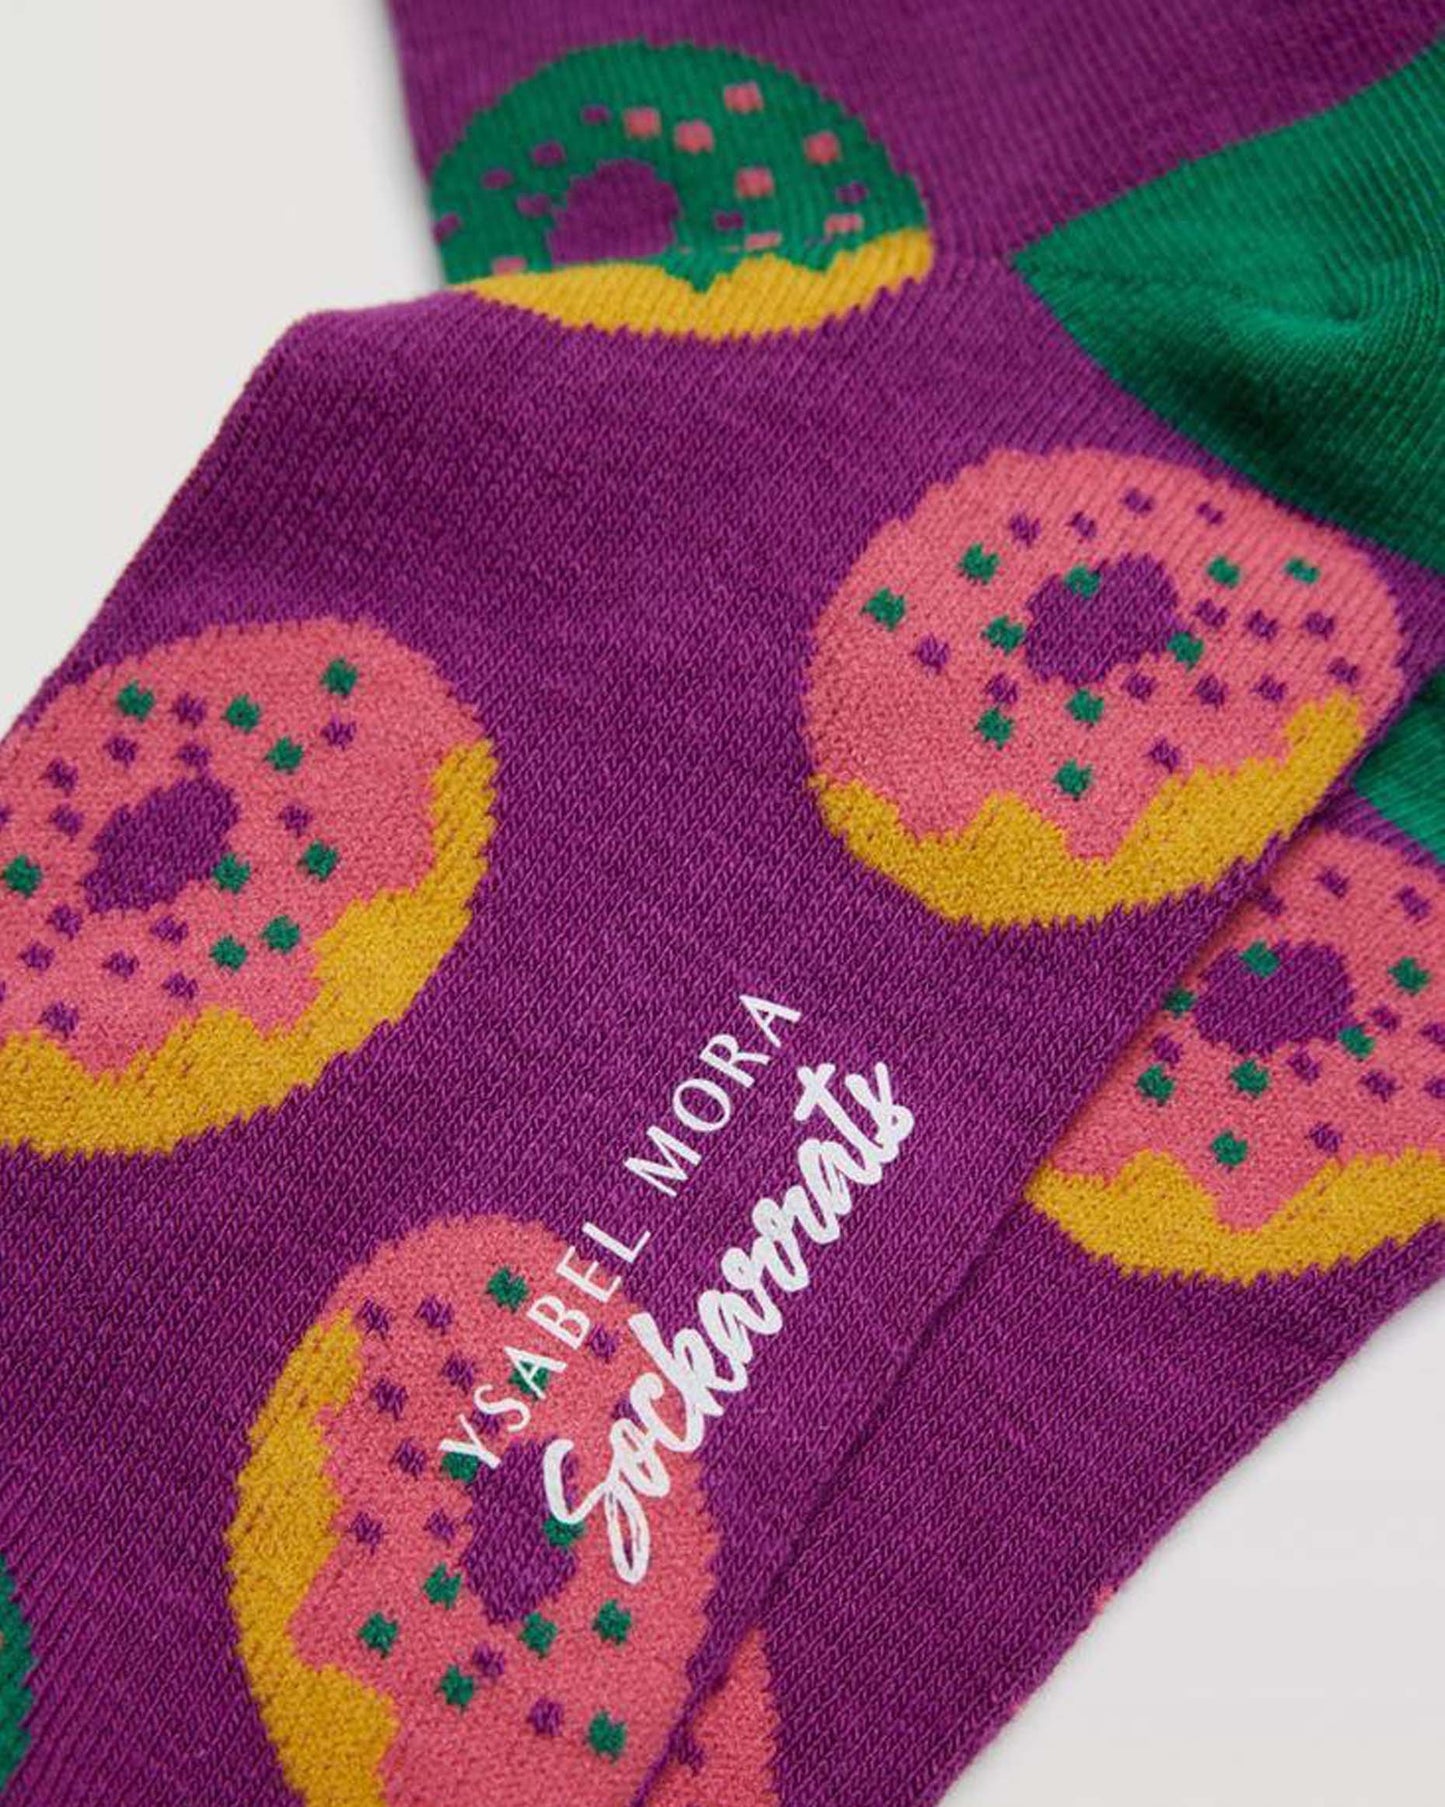 Ysabel Mora Sockarrats - Purple cotton socks with an all over pattern of ring donuts with sprinkles in green, pink and mustard and green heel.